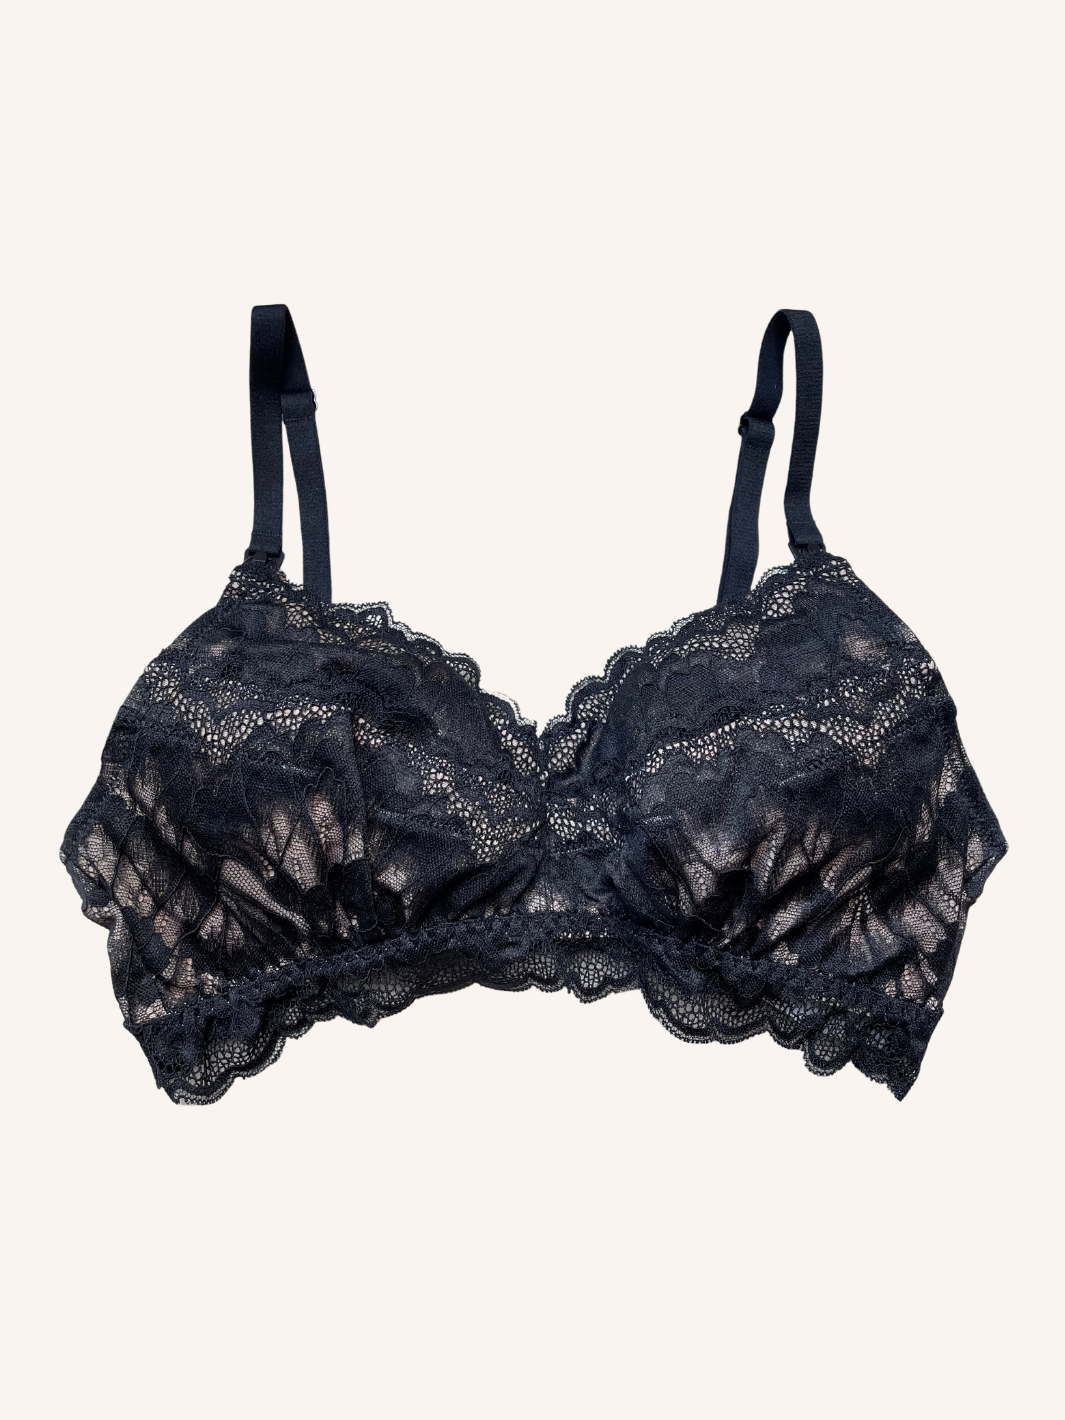 Introducing a new hue to our #1 favorite! The Tulip Lace Nursing Bralette  now comes in the enchanting shade of ✨Dreamy Ash✨